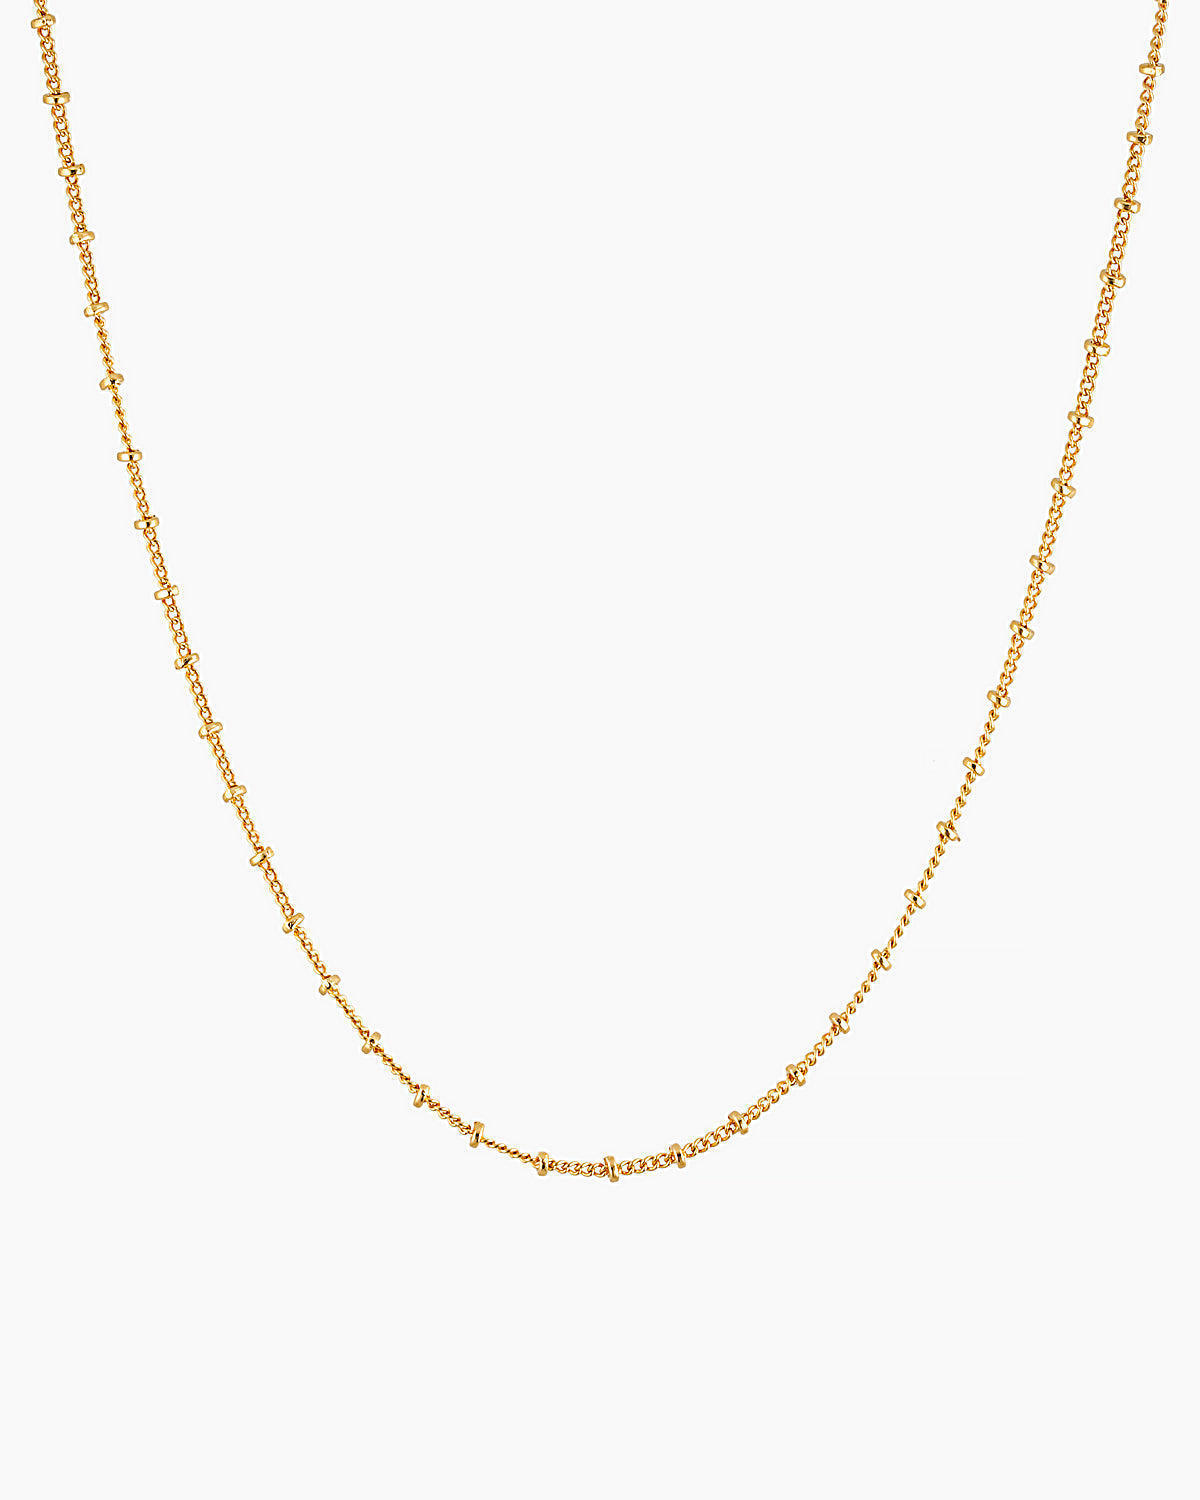 BEA CHAIN NECKLACE